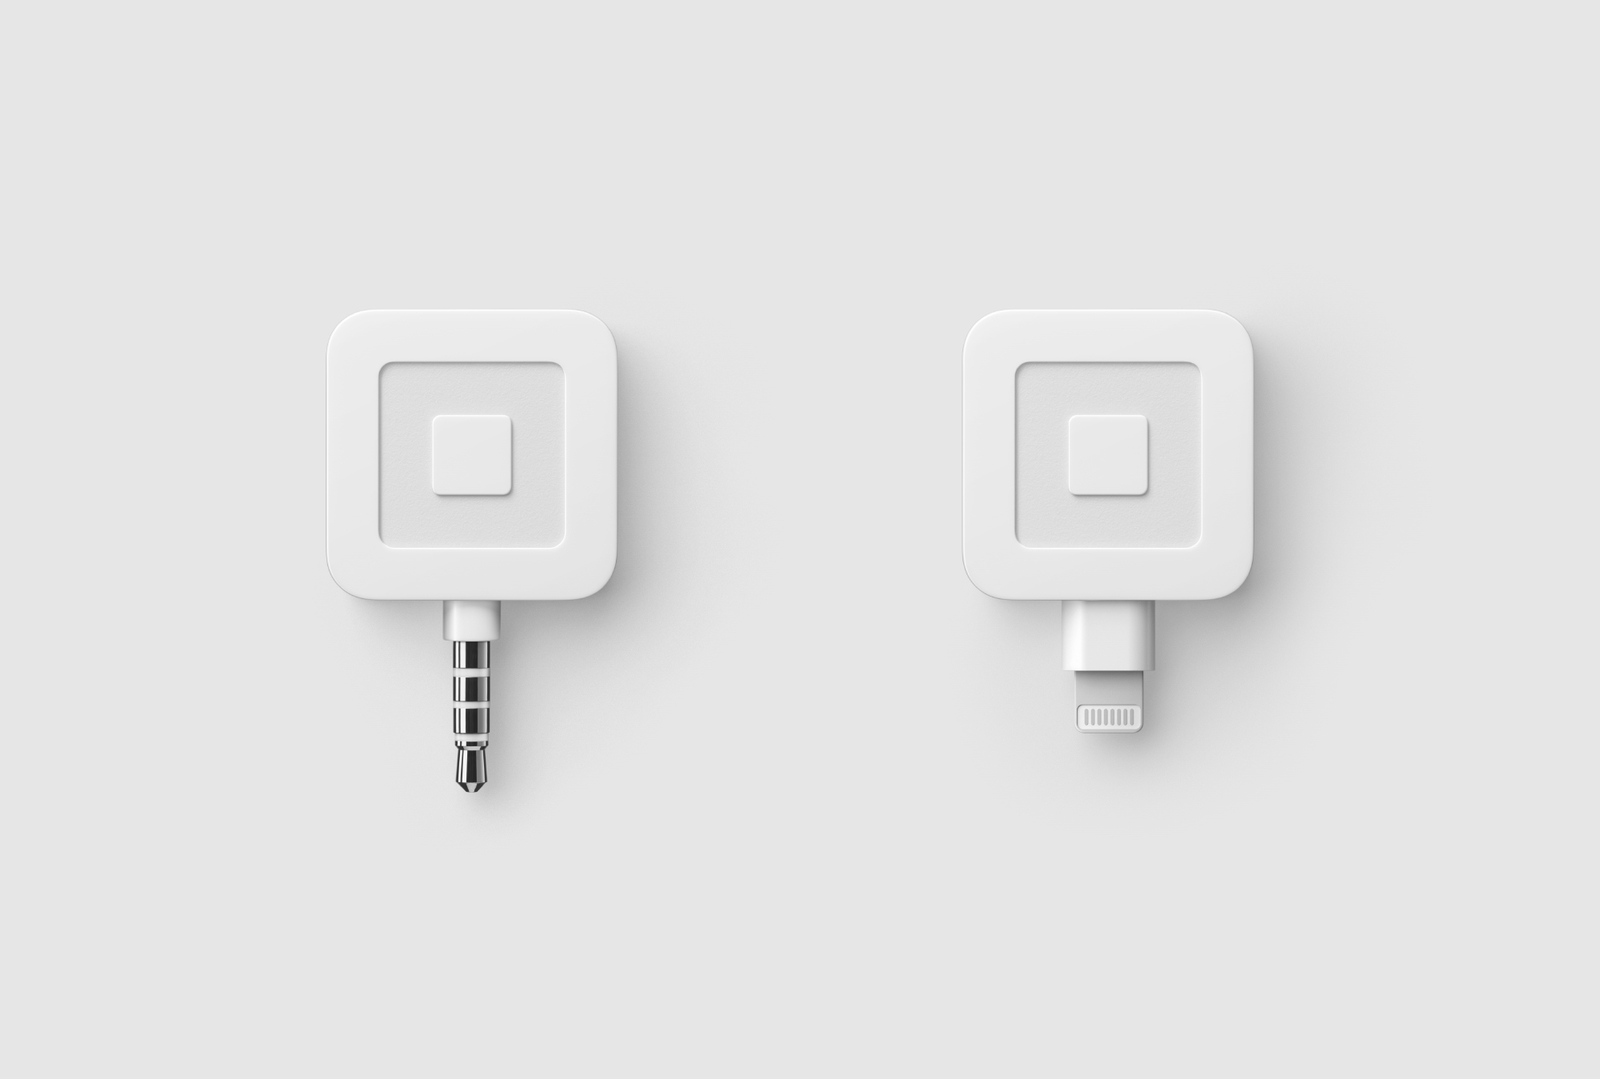 Square's newest card reader